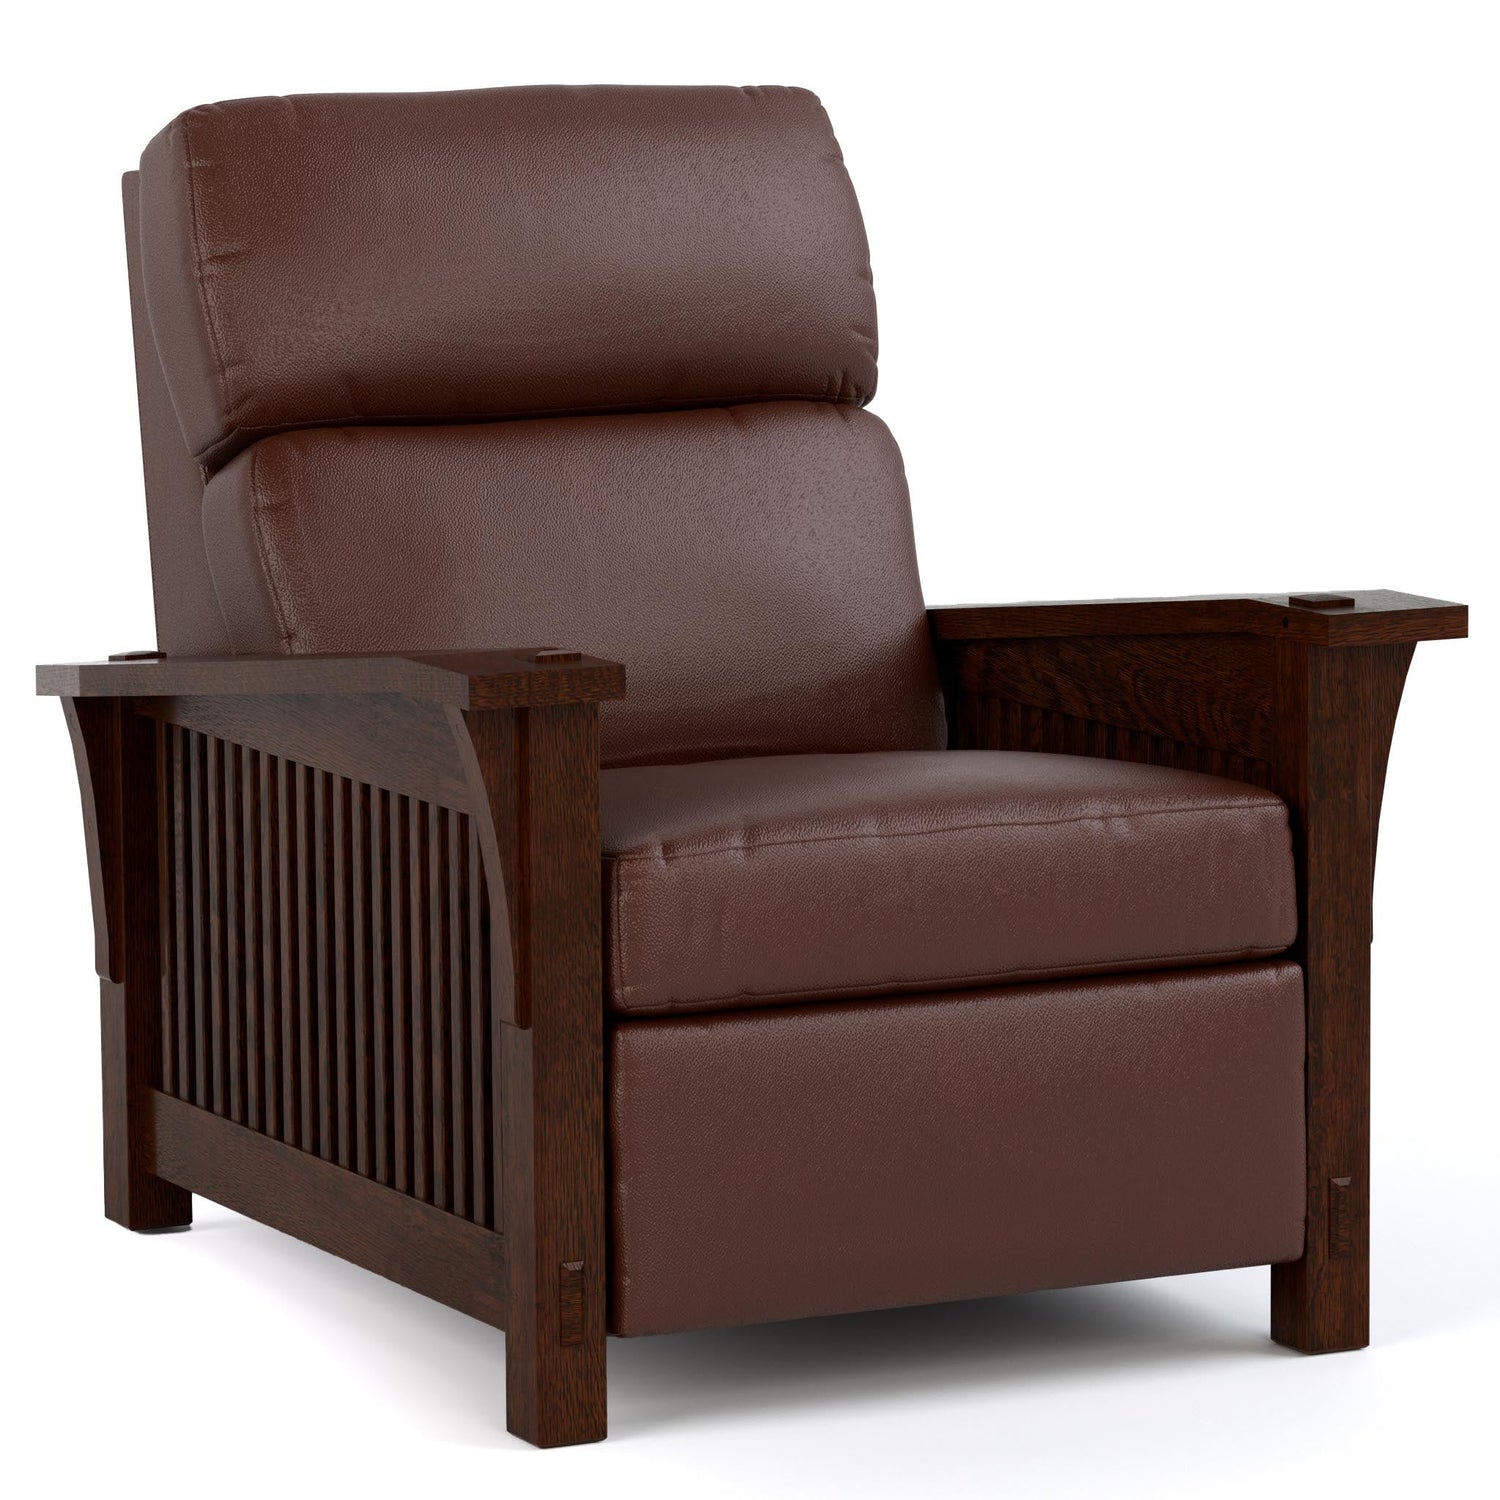 Spindle Morris Power Wall Recliner Colman Sienna Leather 031 - Centennial Finish